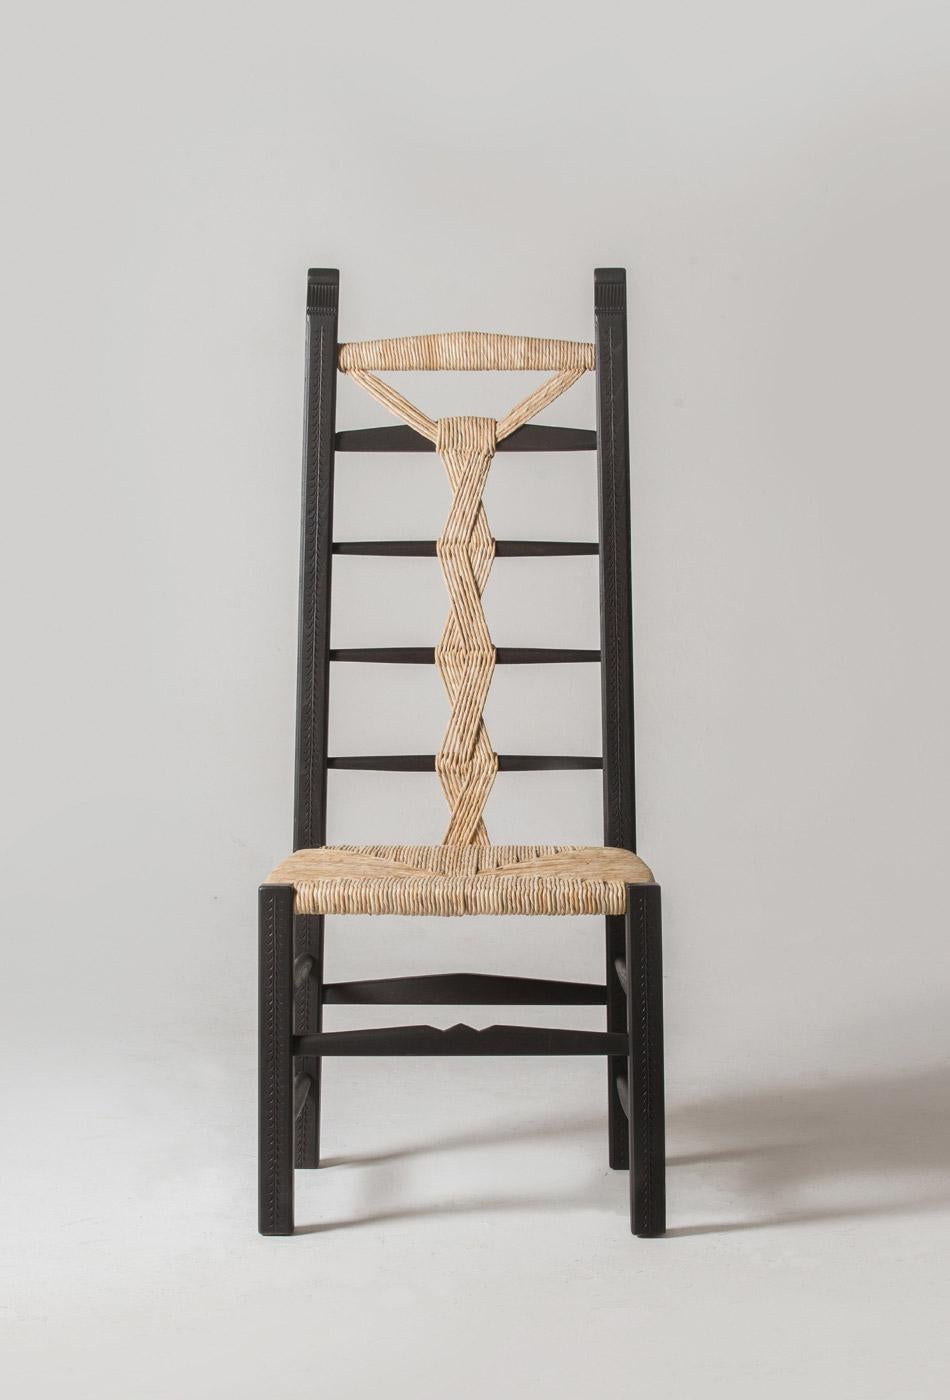 In every rural Sardinian home there are a few wooden, caned chairs that sit in a corner. They are pulled out when visitors come over, when the fire is lit, when it is time to sit in a circle and shell fava beans or crack open almonds. They come in